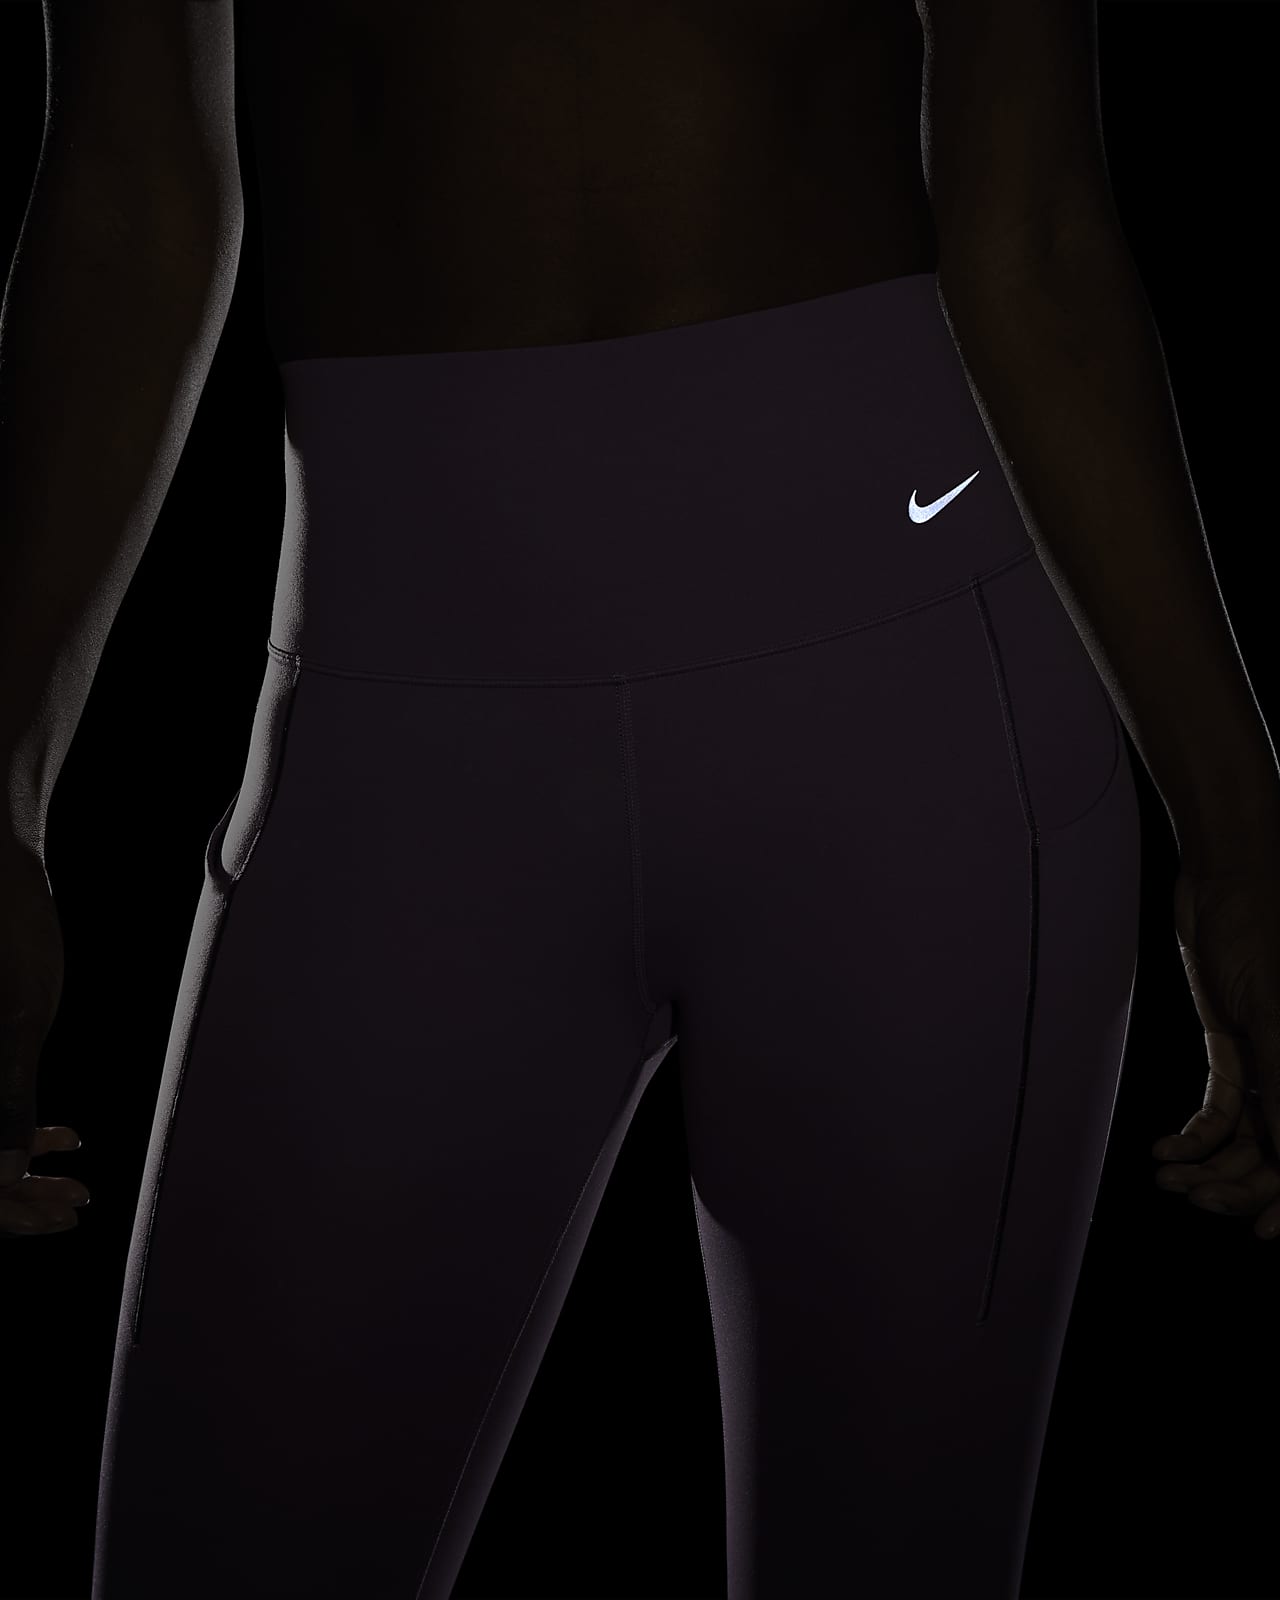 Nike Universa Medium-Support High-Waisted 7/8 Leggings with